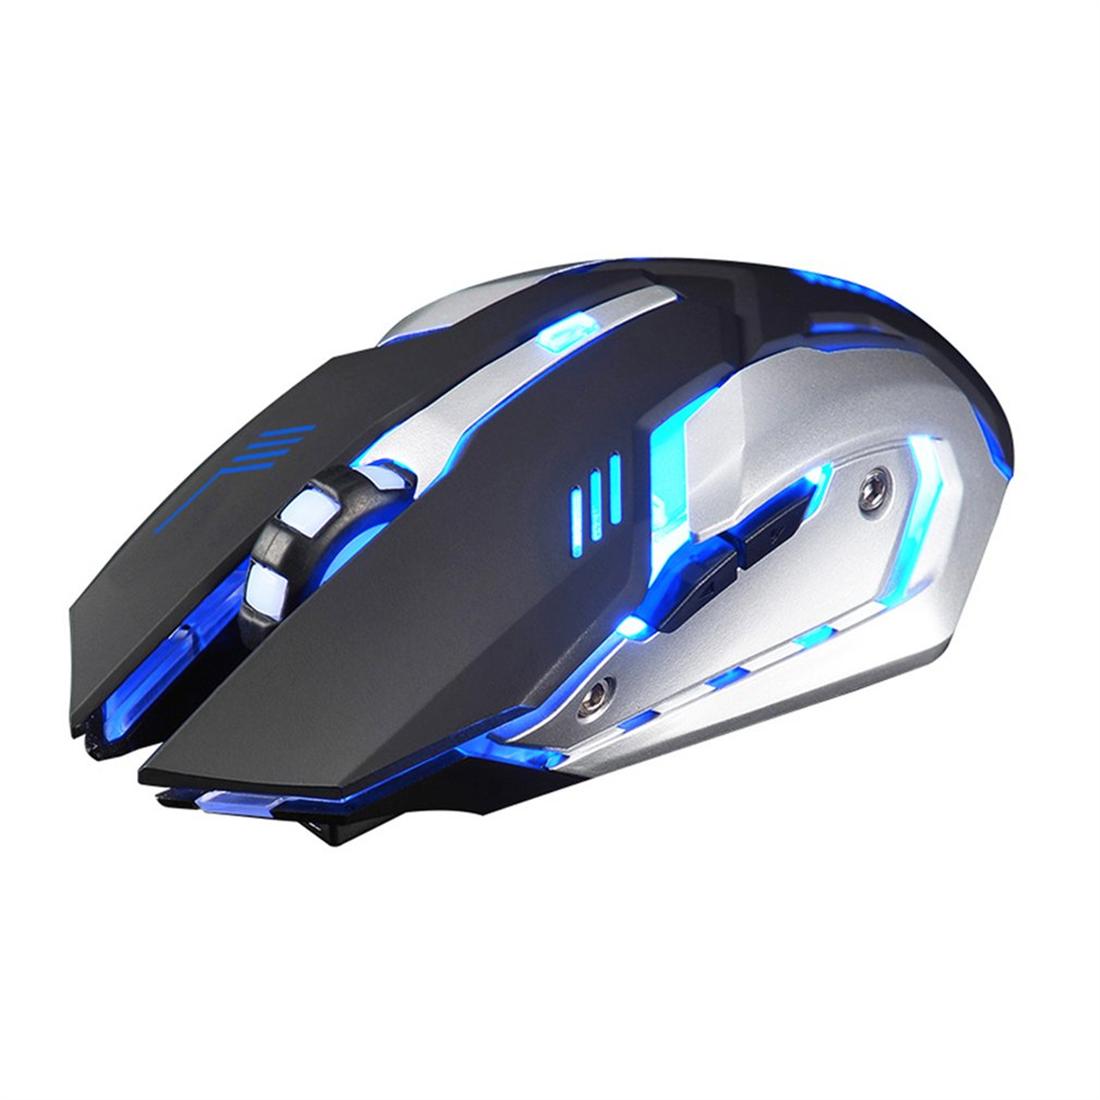 X7 Ergonomic Gaming Mouse 6 Buttons (end 4/15/2021 3:04 AM)